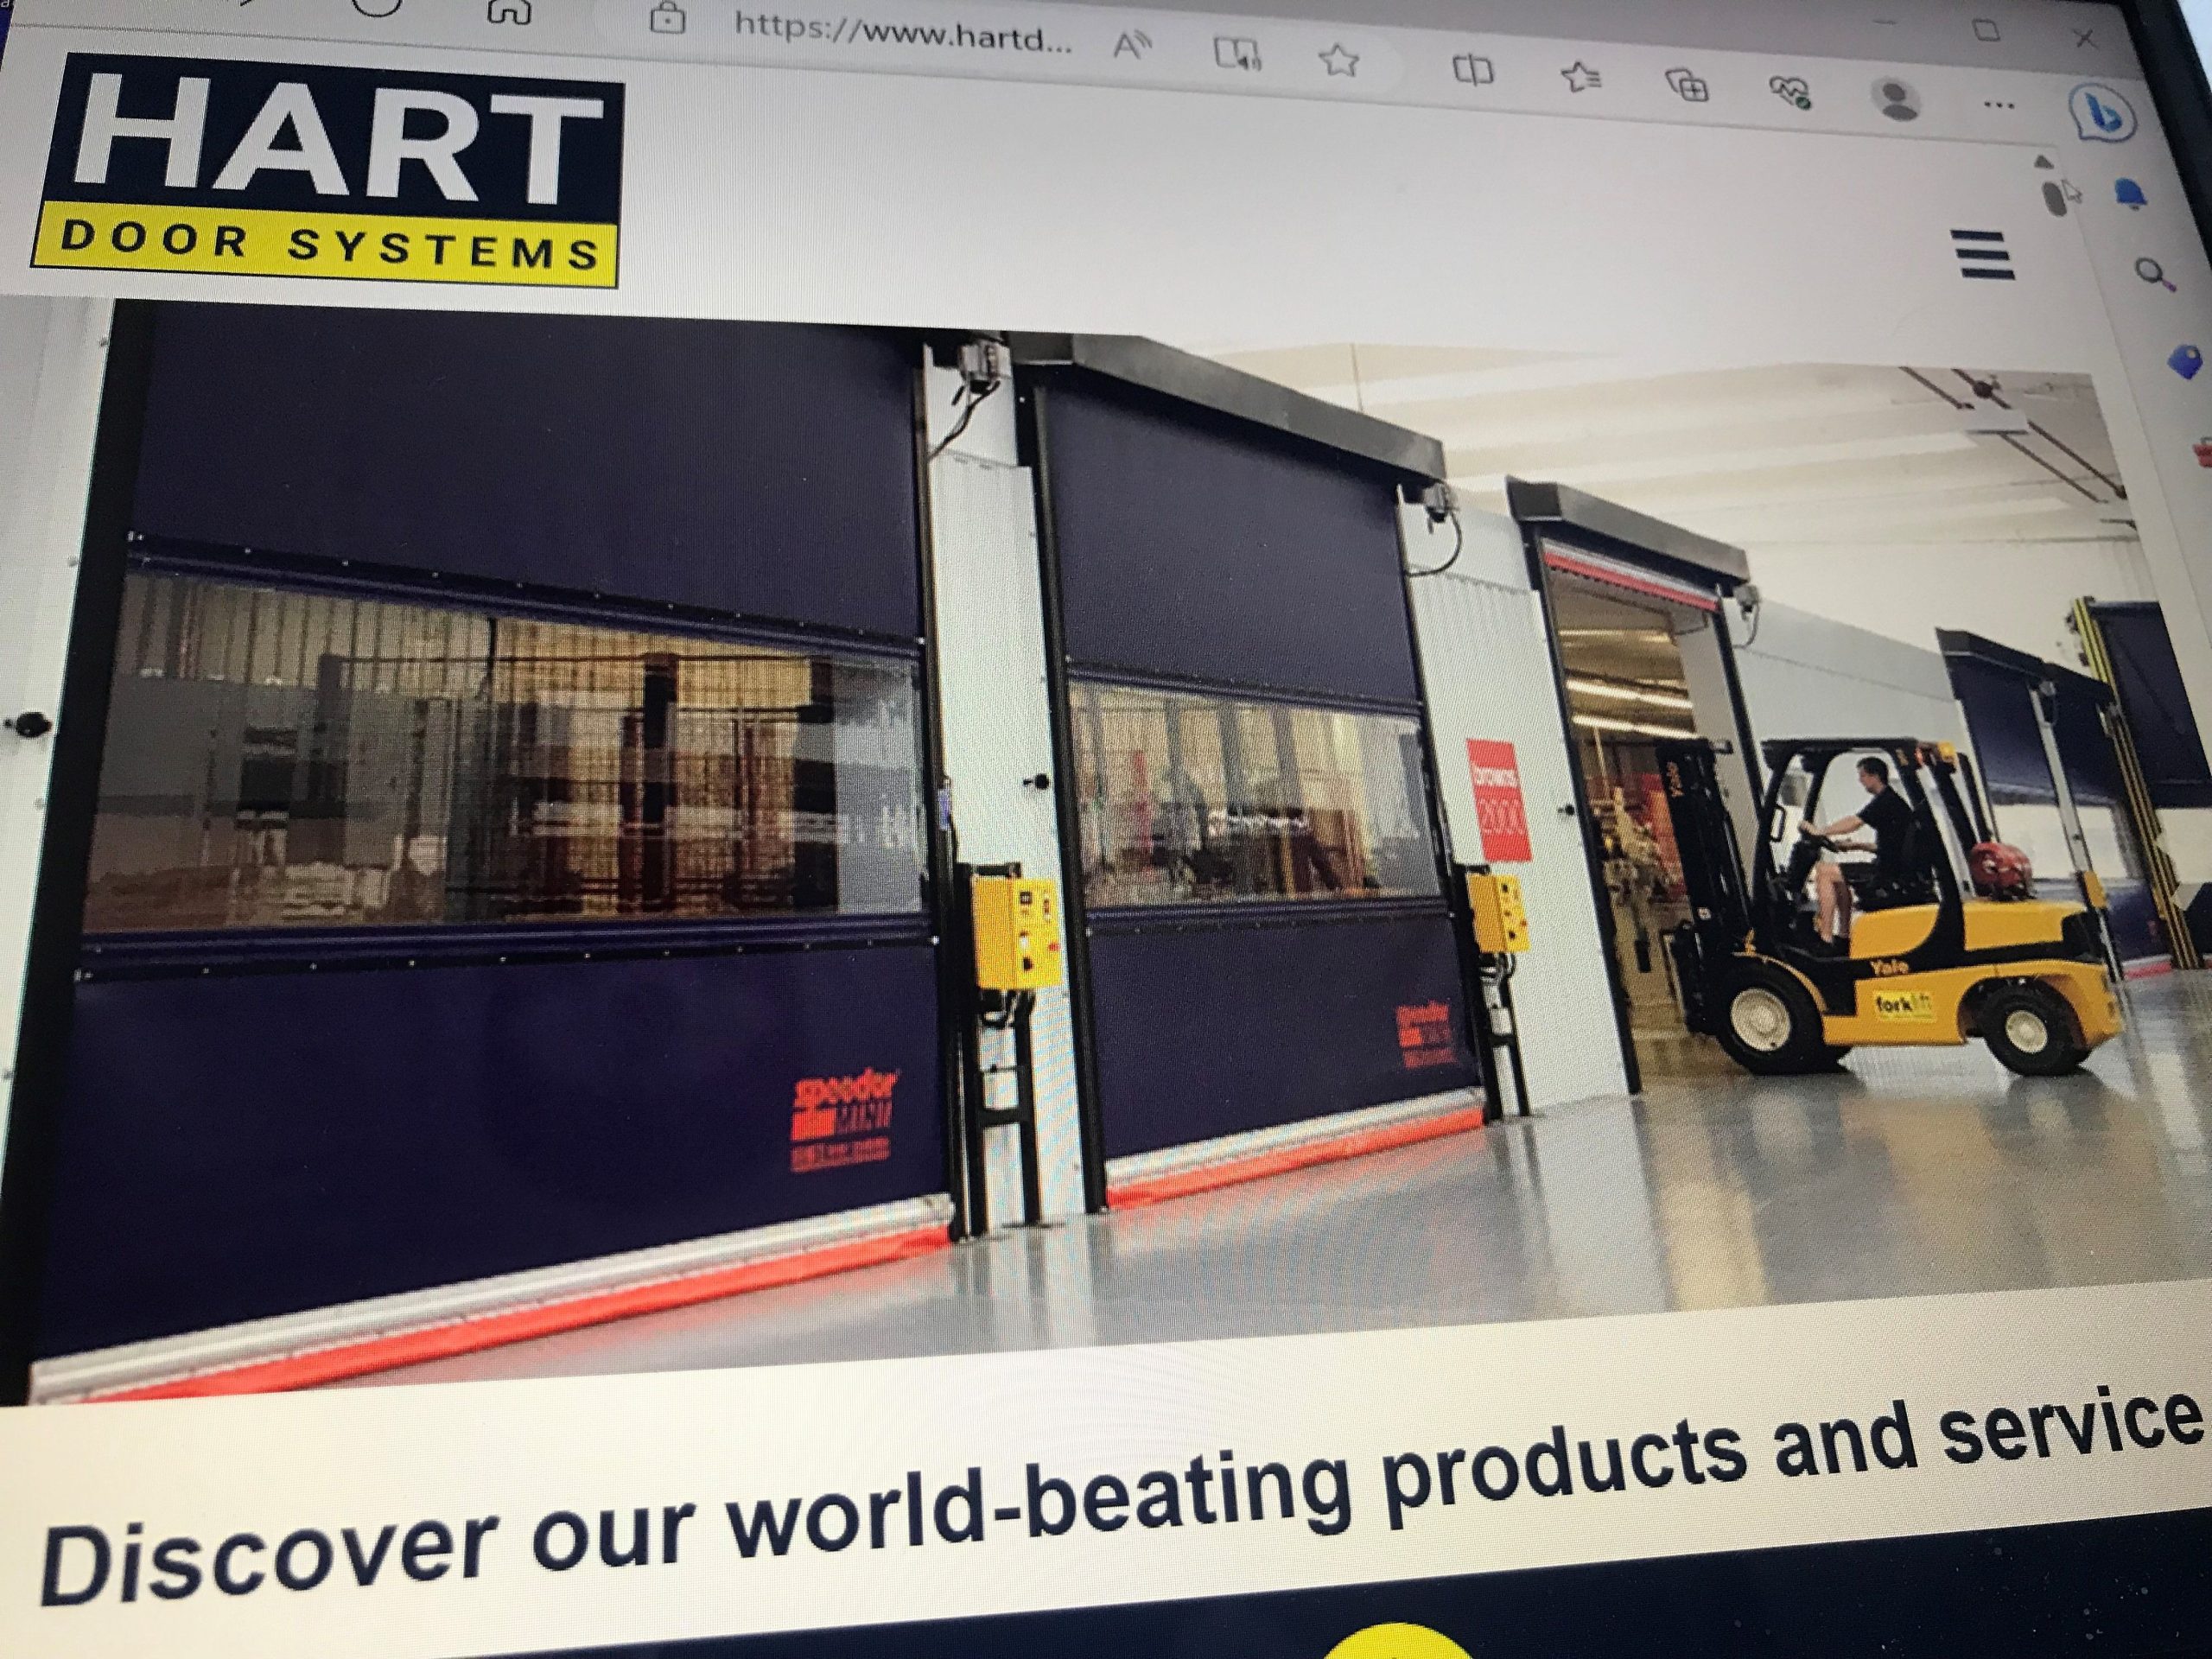 Hart launches new website    